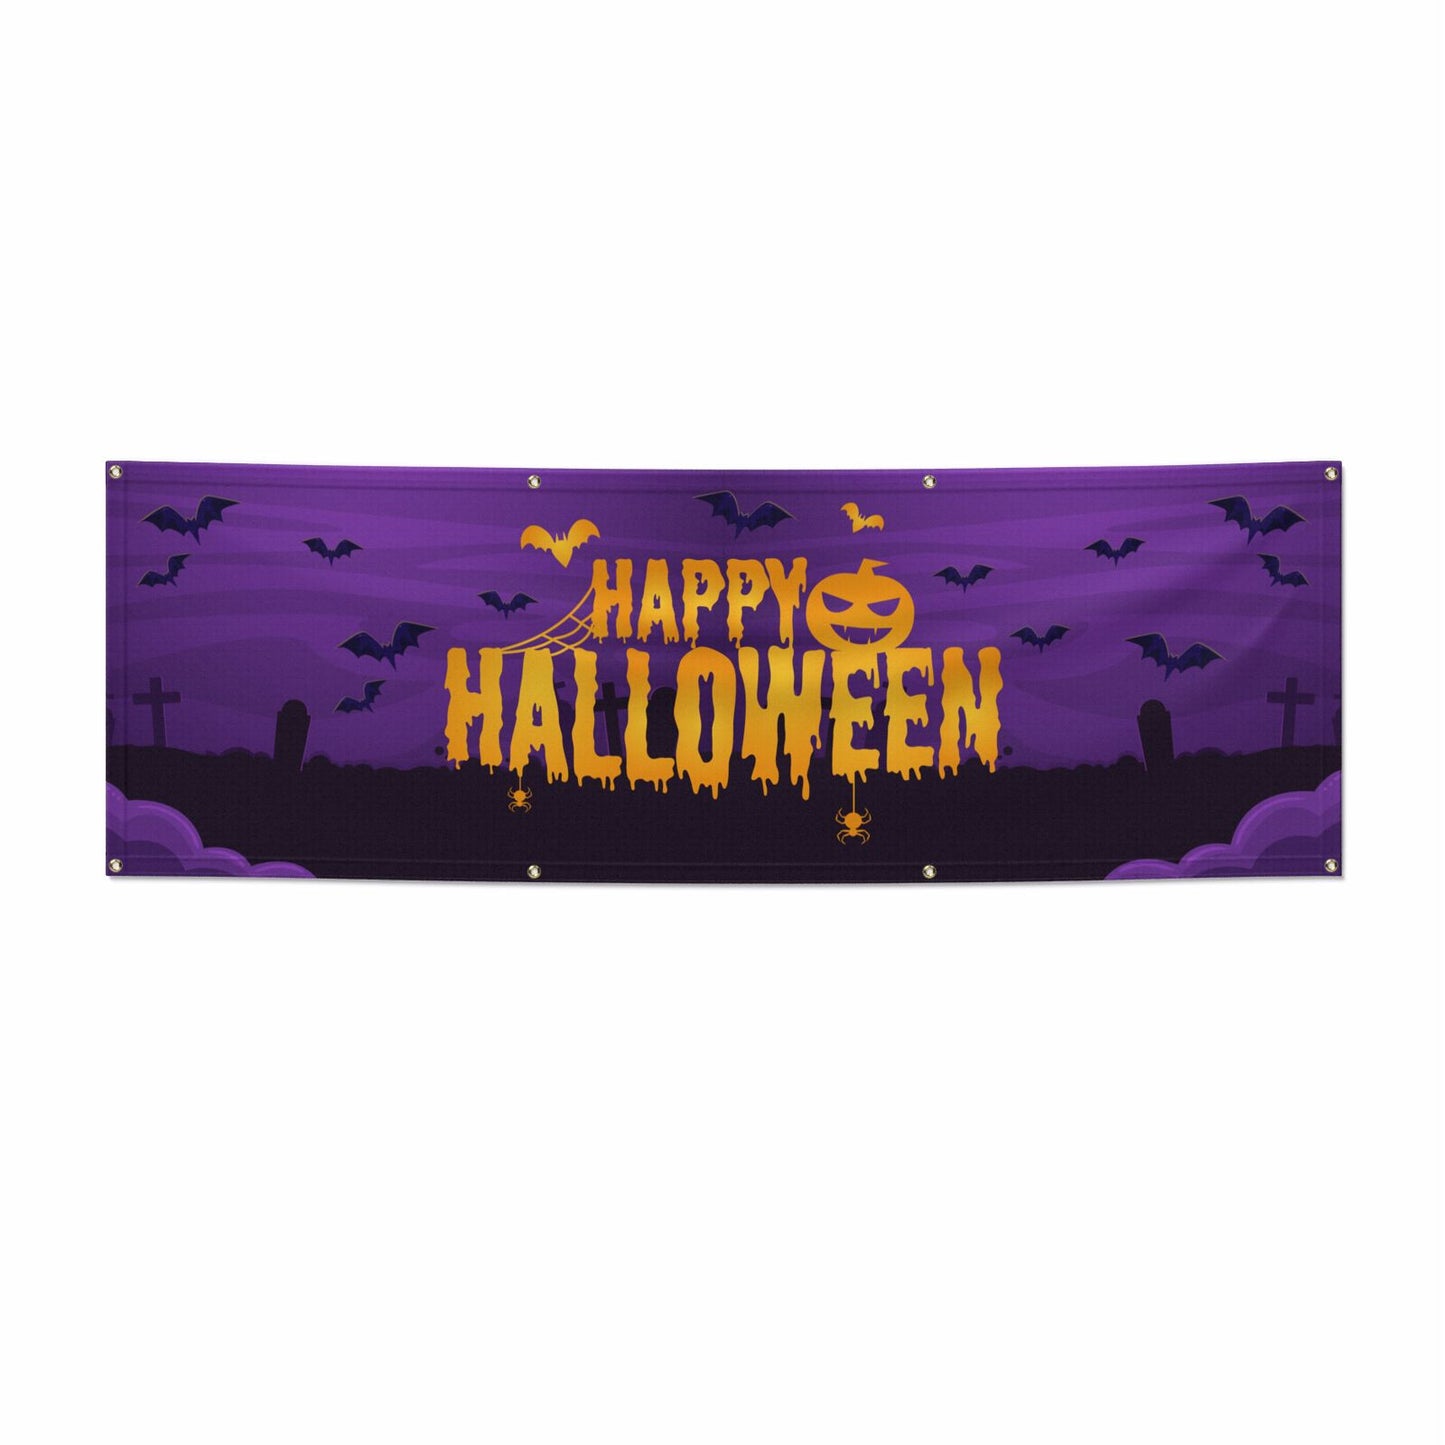 Happy Halloween Orange Text 6x2 Vinly Banner with Grommets